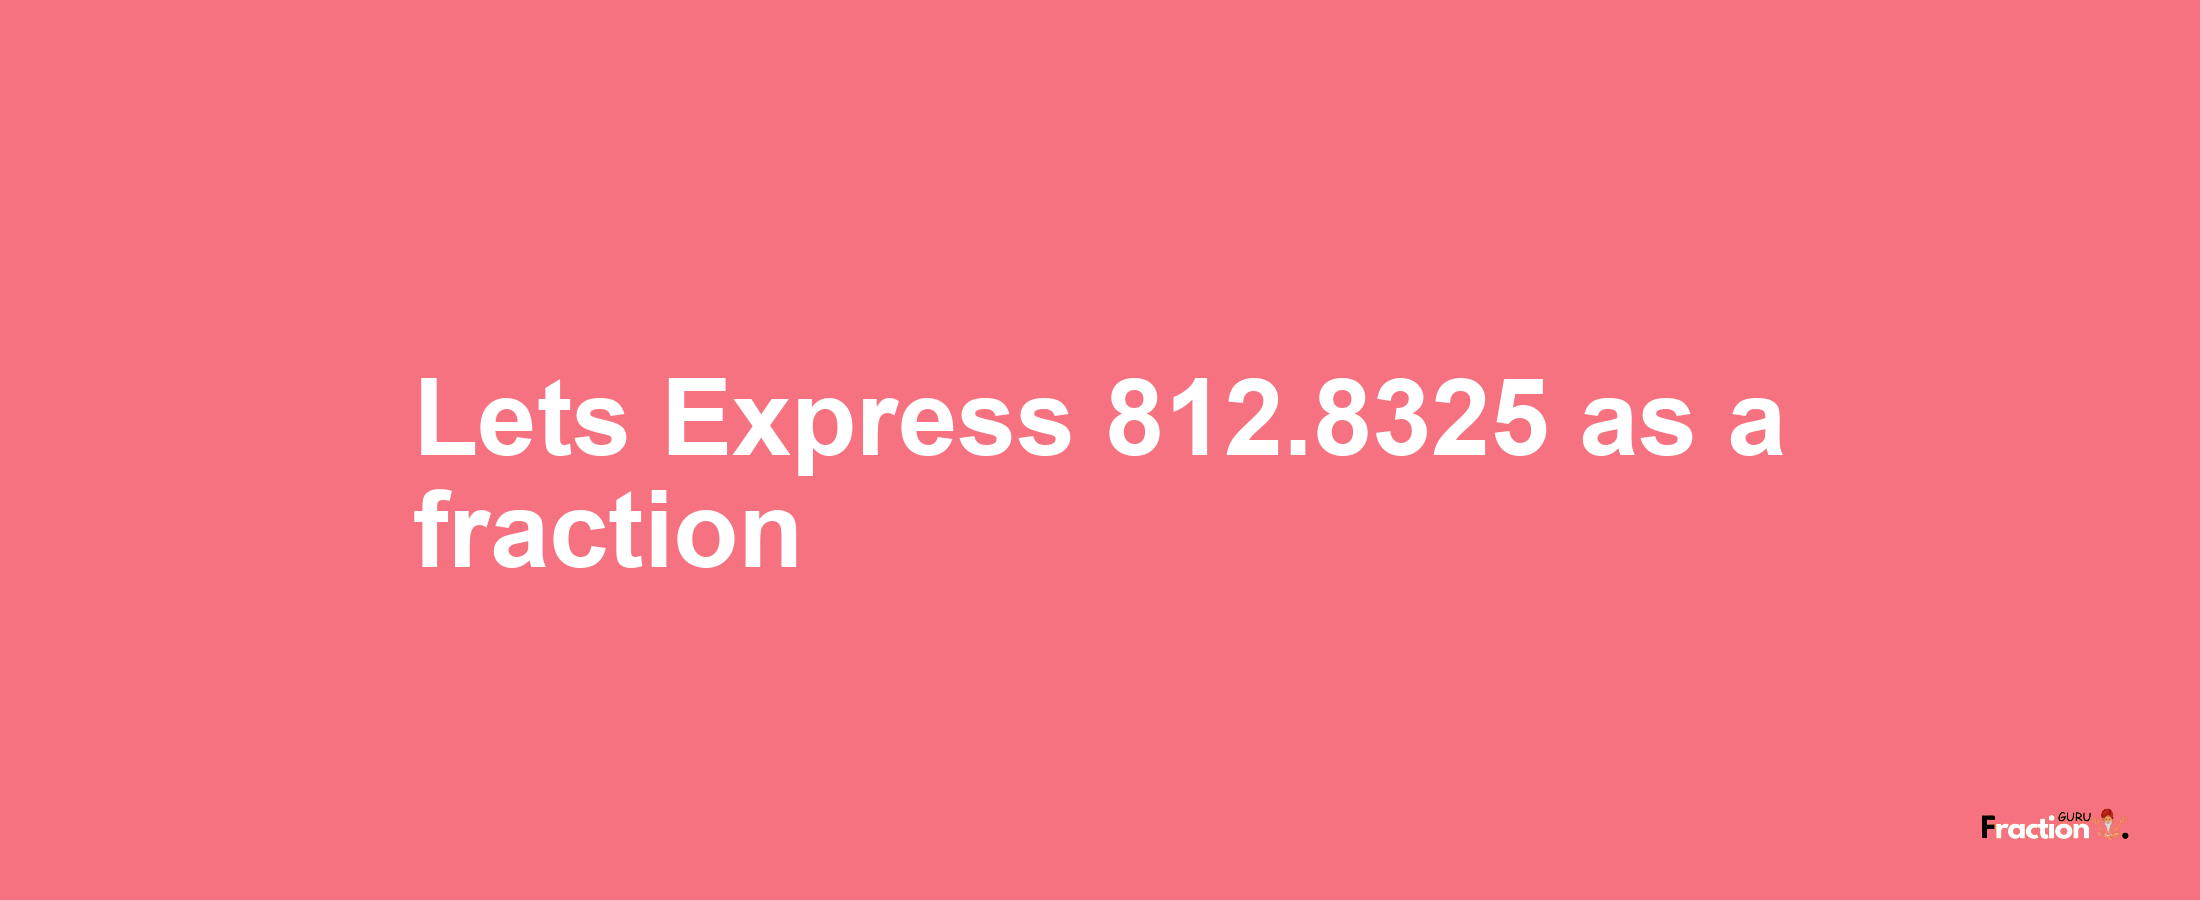 Lets Express 812.8325 as afraction